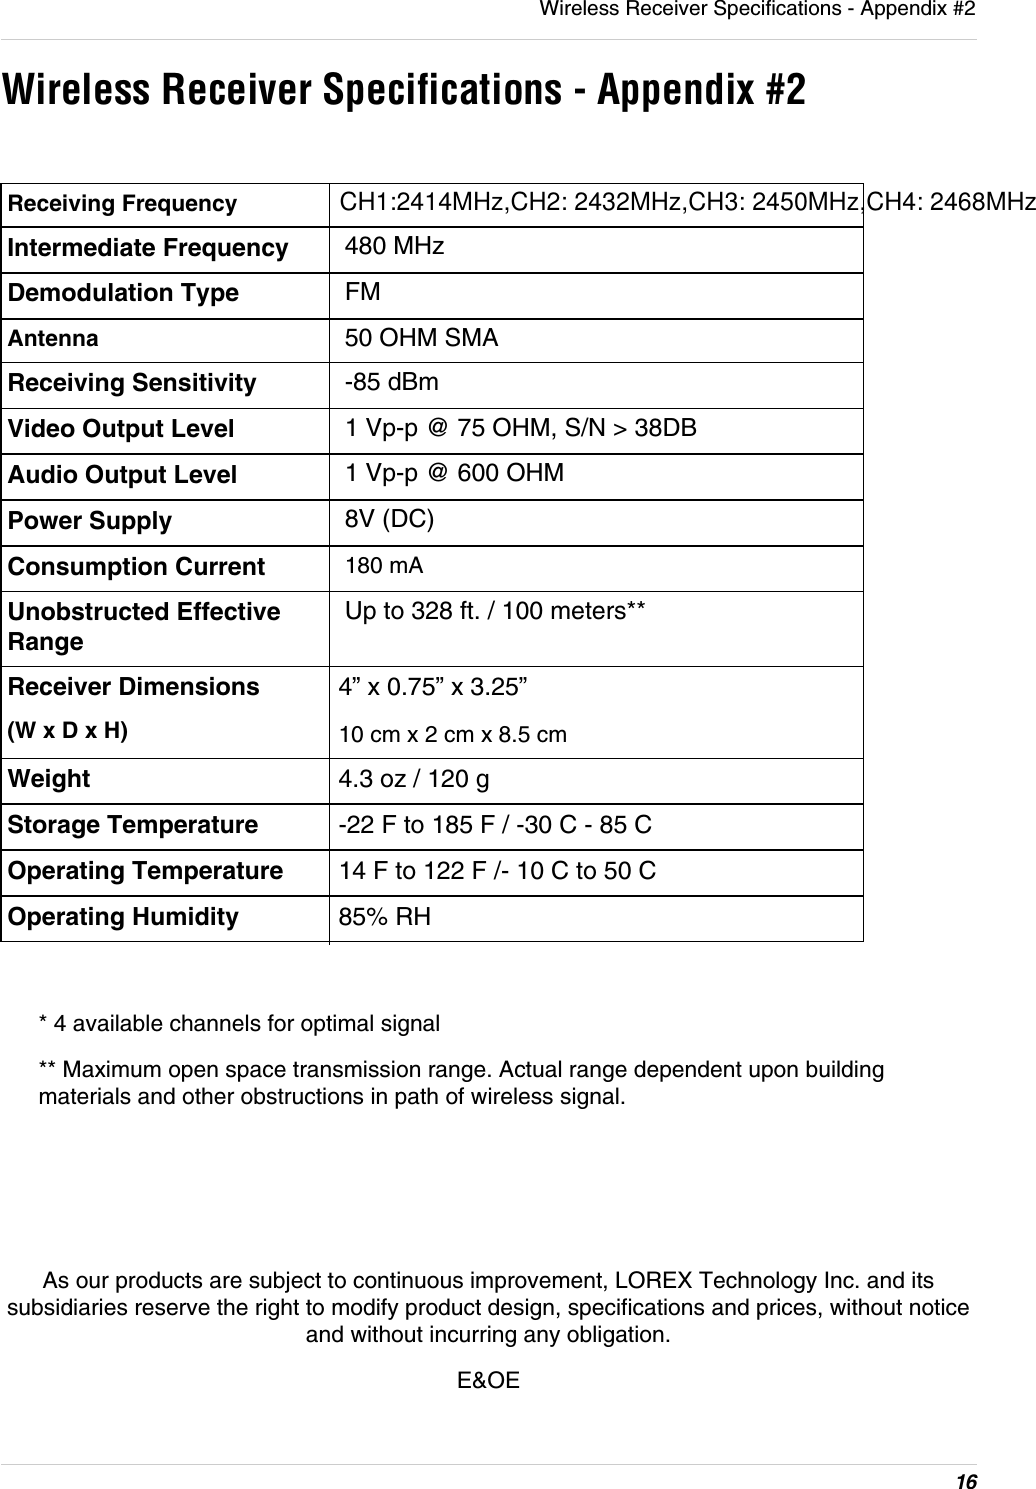 16Wireless Receiver Specifications - Appendix #2Wireless Receiver Specifications - Appendix #2* 4 available channels for optimal signal** Maximum open space transmission range. Actual range dependent upon building materials and other obstructions in path of wireless signal.As our products are subject to continuous improvement, LOREX Technology Inc. and its subsidiaries reserve the right to modify product design, specifications and prices, without notice and without incurring any obligation.E&amp;OEReceiving Frequency                 CH1:2414MHz,CH2: 2432MHz,CH3: 2450MHz,CH4: 2468MHzIntermediate Frequency 480 MHzDemodulation Type FMAntenna 50 OHM SMAReceiving Sensitivity -85 dBmVideo Output Level 1 Vp-p @ 75 OHM, S/N &gt; 38DBAudio Output Level 1 Vp-p @ 600 OHMPower Supply 8V (DC)Consumption Current 180 mAUnobstructed Effective RangeUp to 328 ft. / 100 meters**Receiver Dimensions (W x D x H)4” x 0.75” x 3.25”10 cm x 2 cm x 8.5 cmWeight 4.3 oz / 120 gStorage Temperature -22 F to 185 F / -30 C - 85 COperating Temperature 14 F to 122 F /- 10 C to 50 COperating Humidity 85% RH